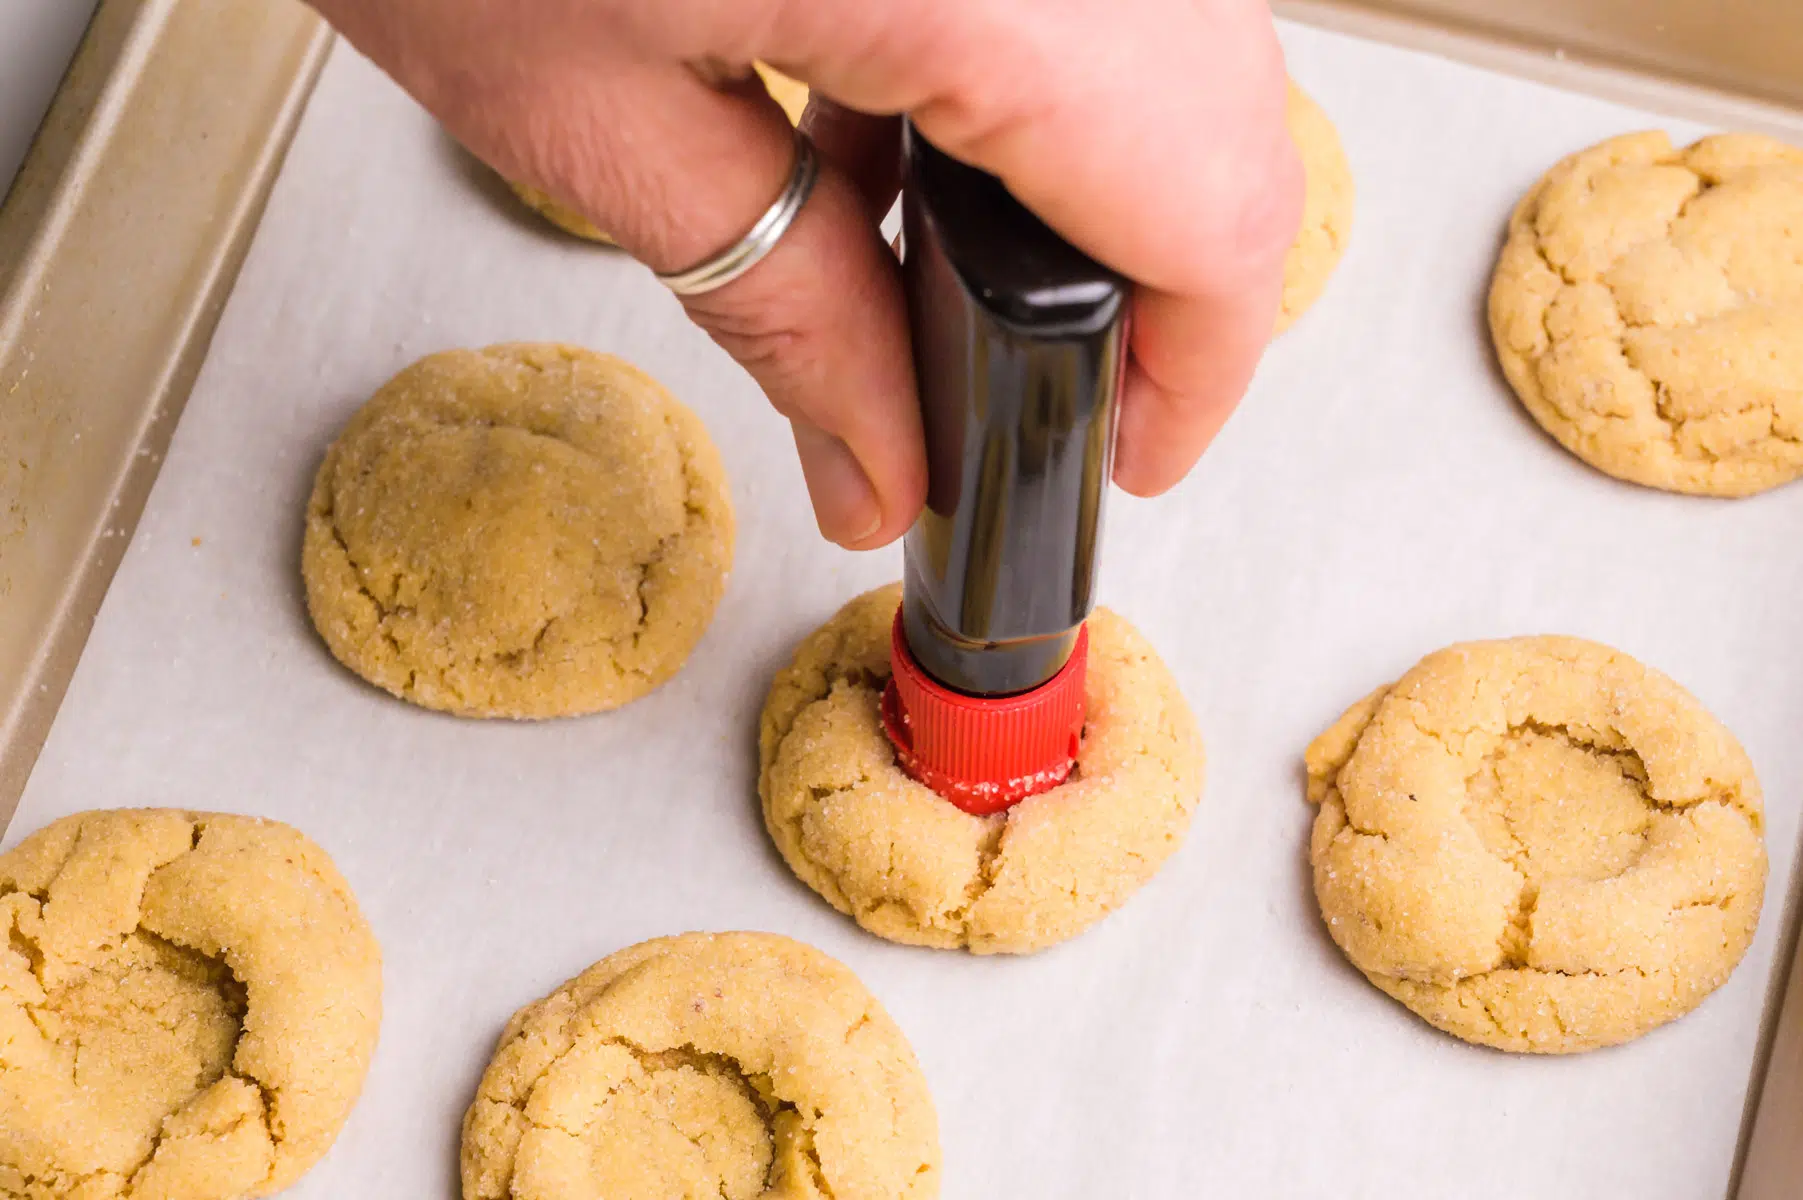 A hand holds an extract bottle, using the cap to make impressions in the center of peanut butter cookies.